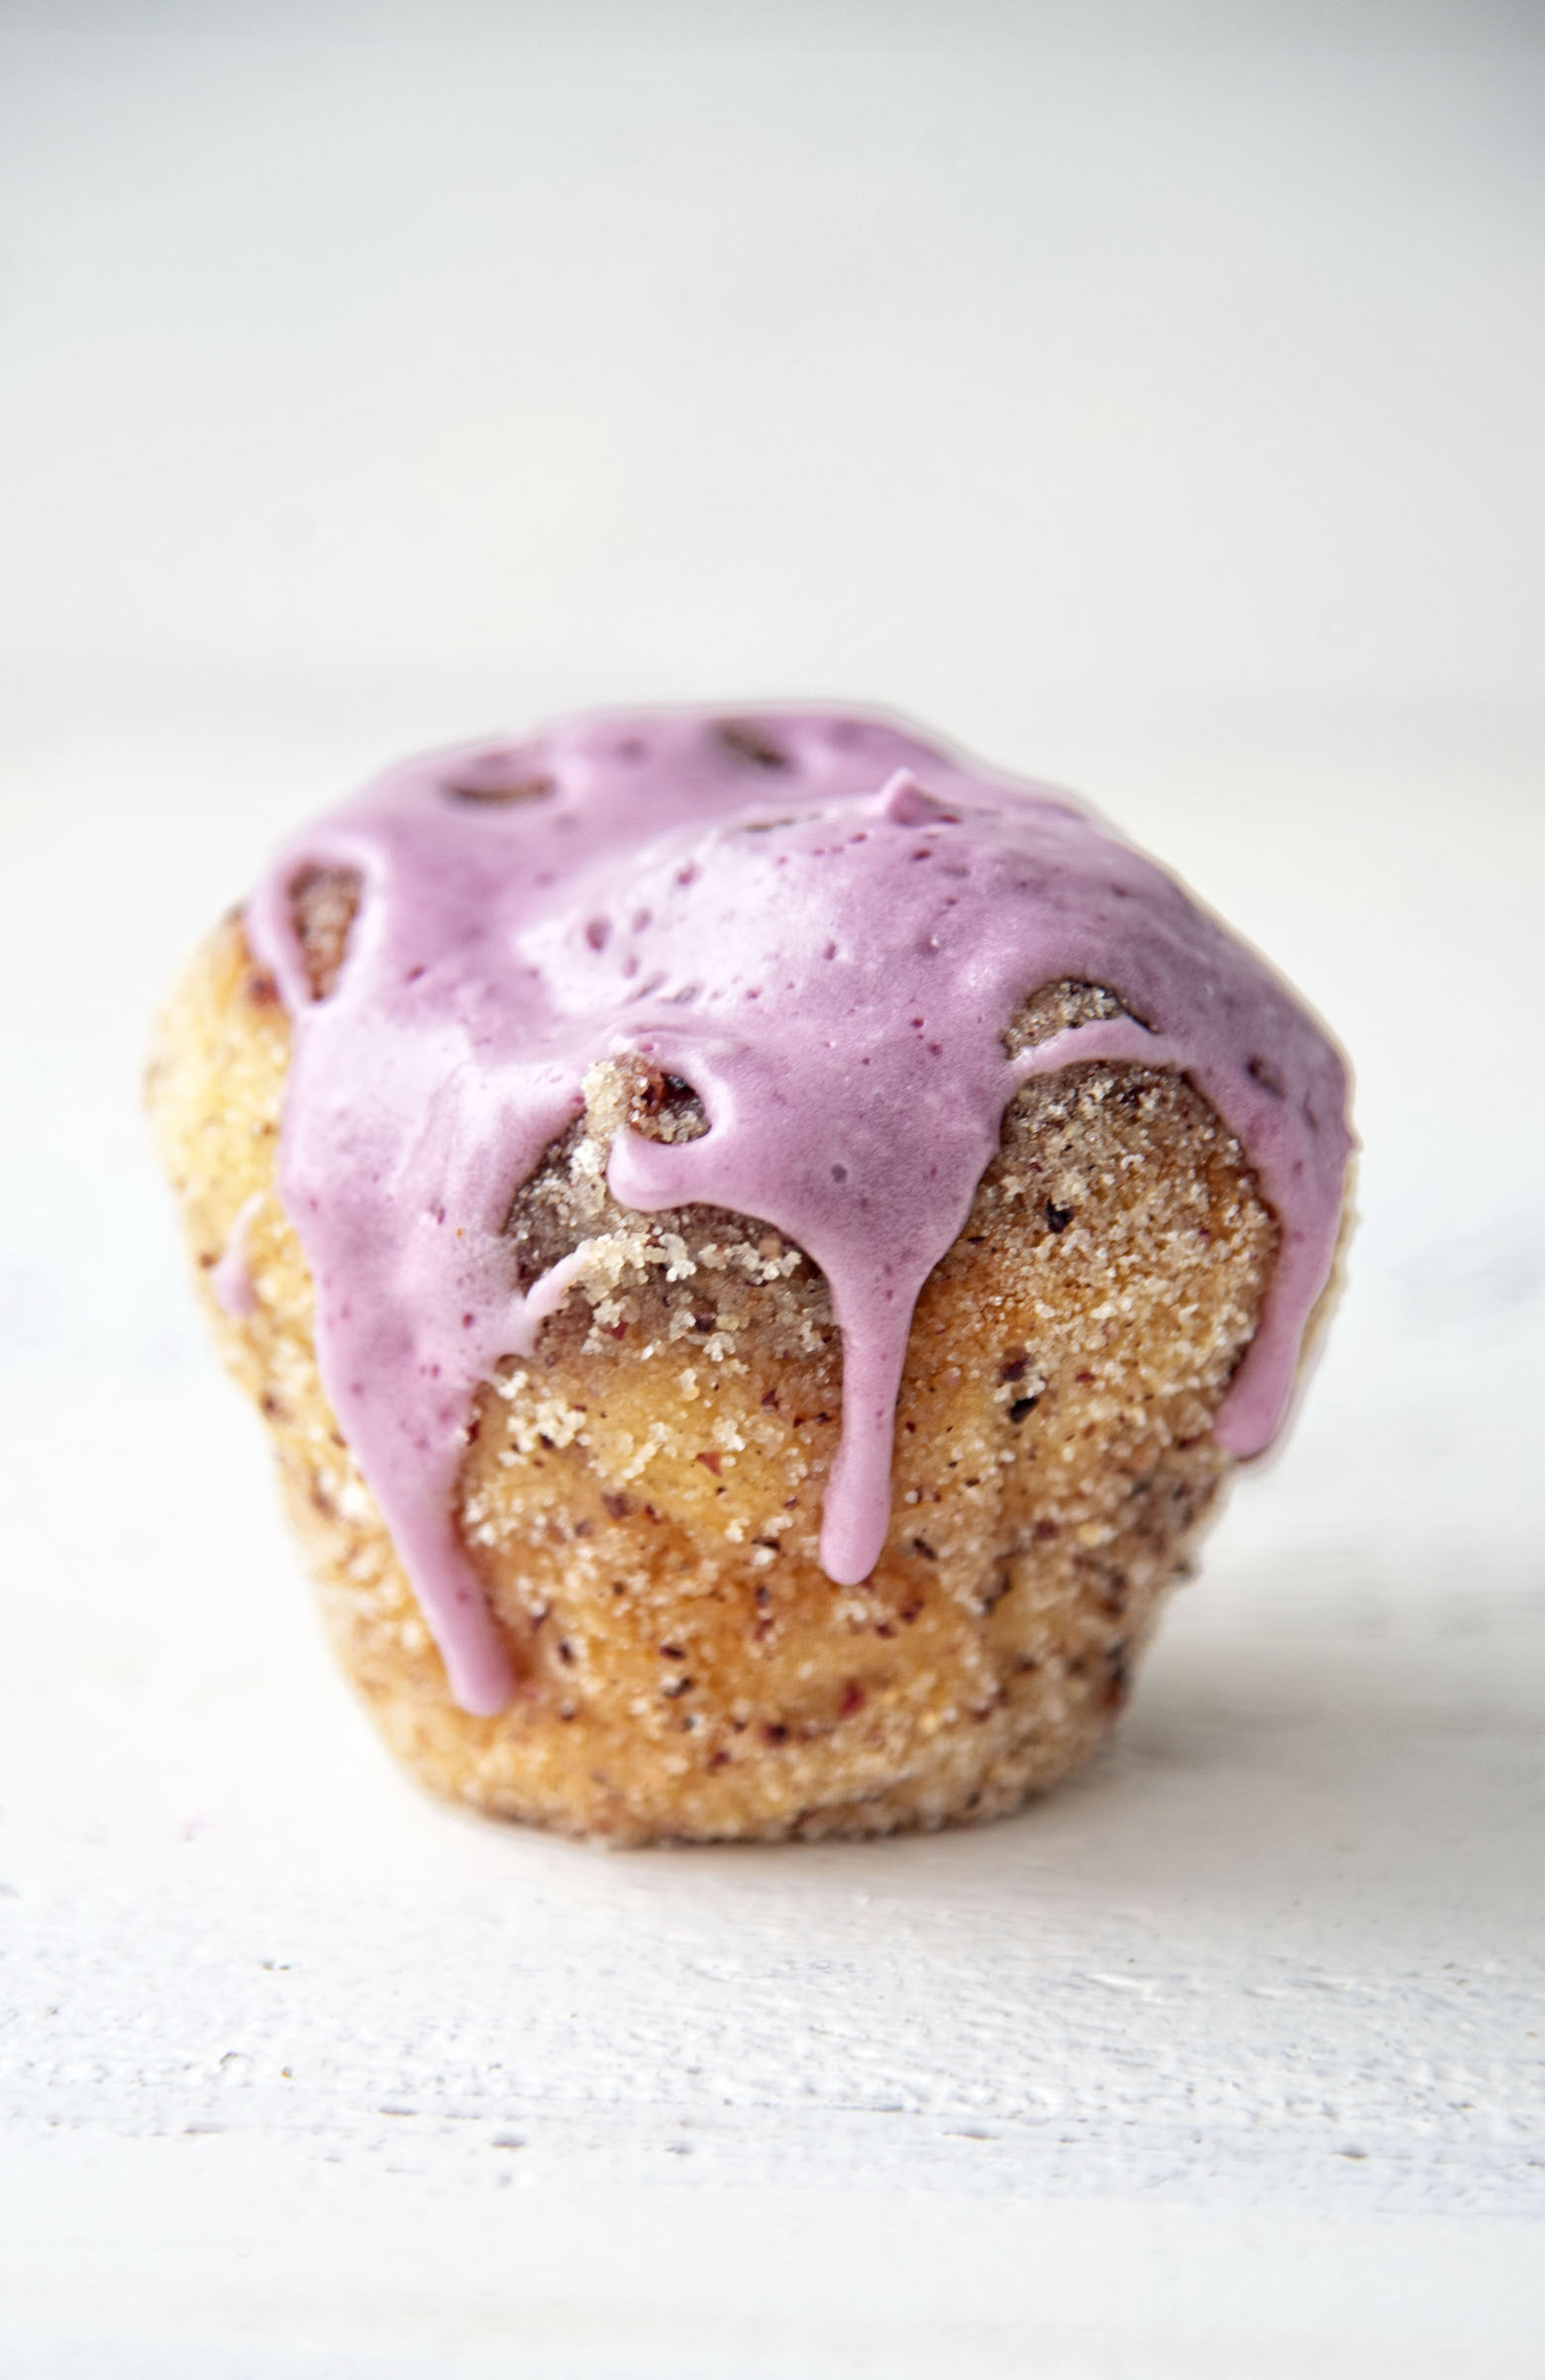 Peanut Butter and Jelly Sugared Buns